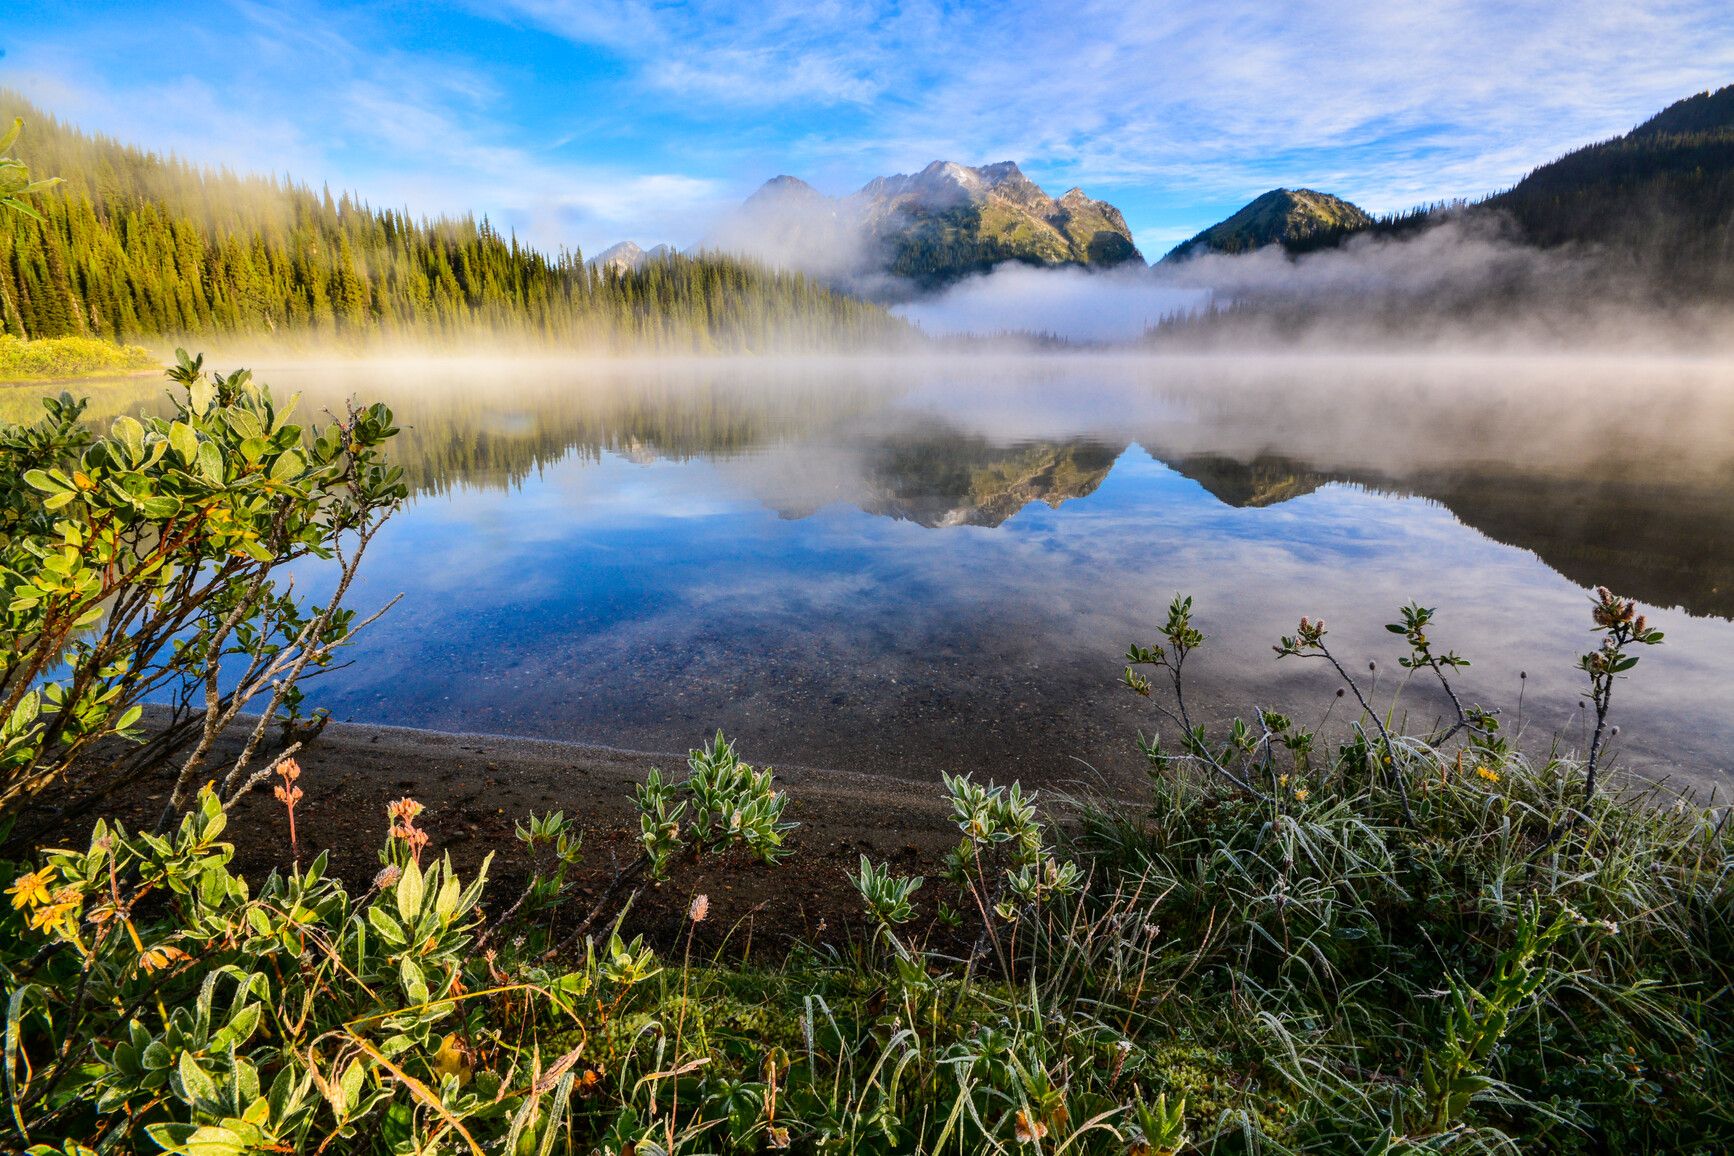 Fog rises from Big Peters Lake while the blue sky reflects on its peaceful surface in Monashee Park.